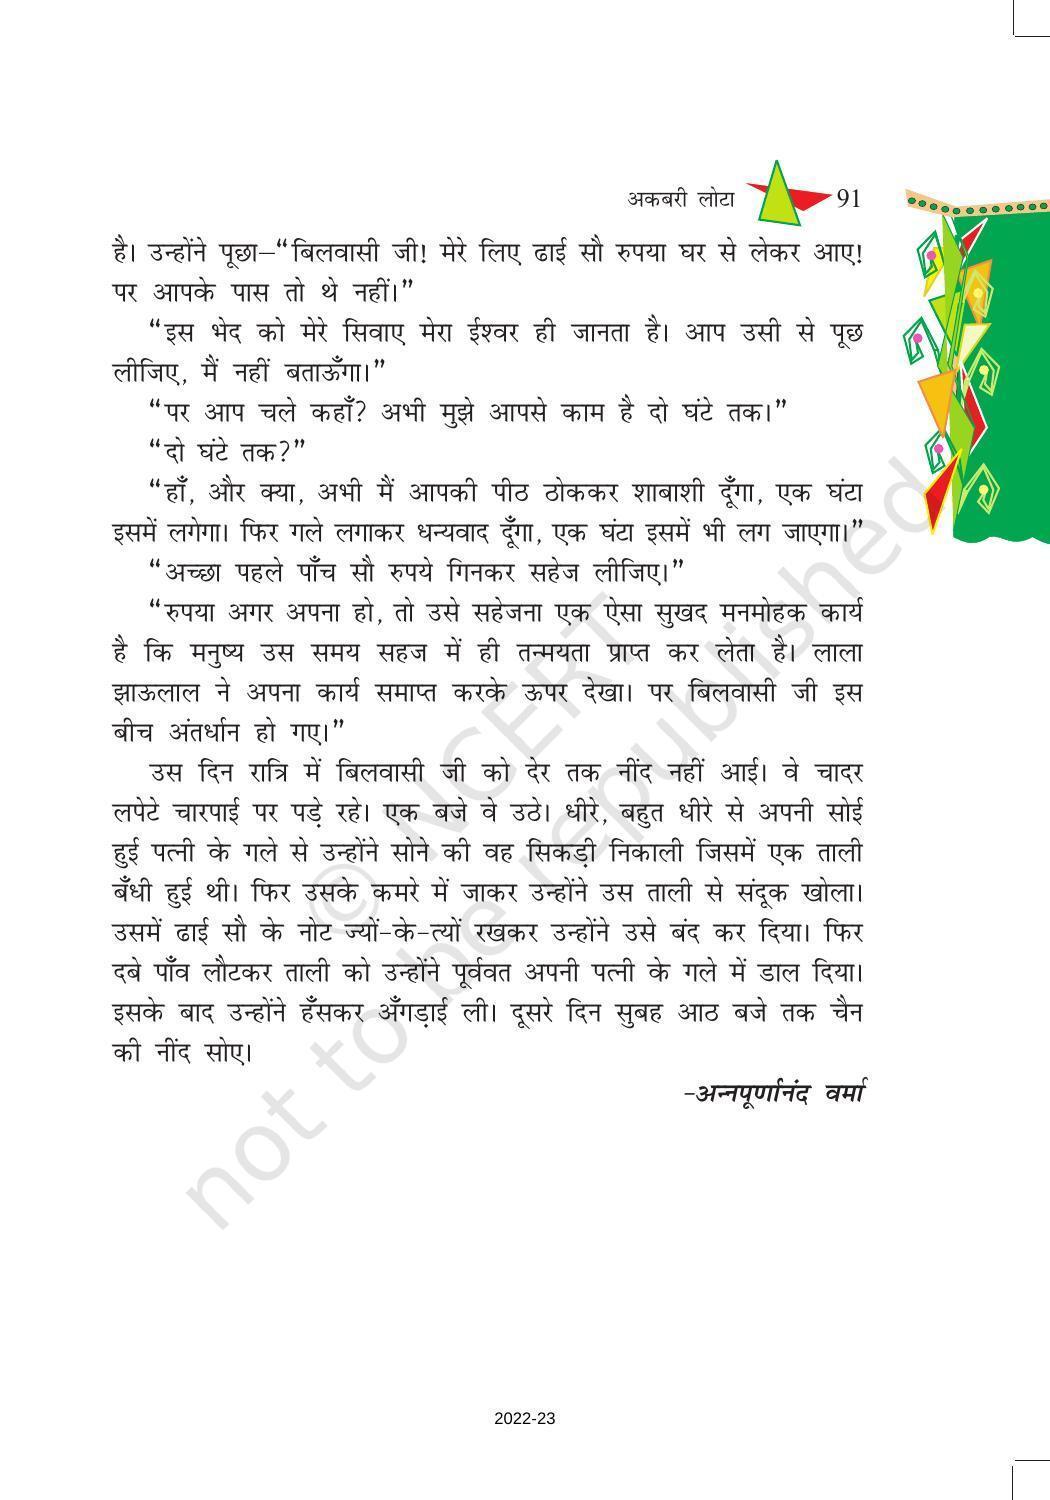 NCERT Book for Class 8 Hindi Vasant Chapter 14 अकबरी लोटा - Page 9